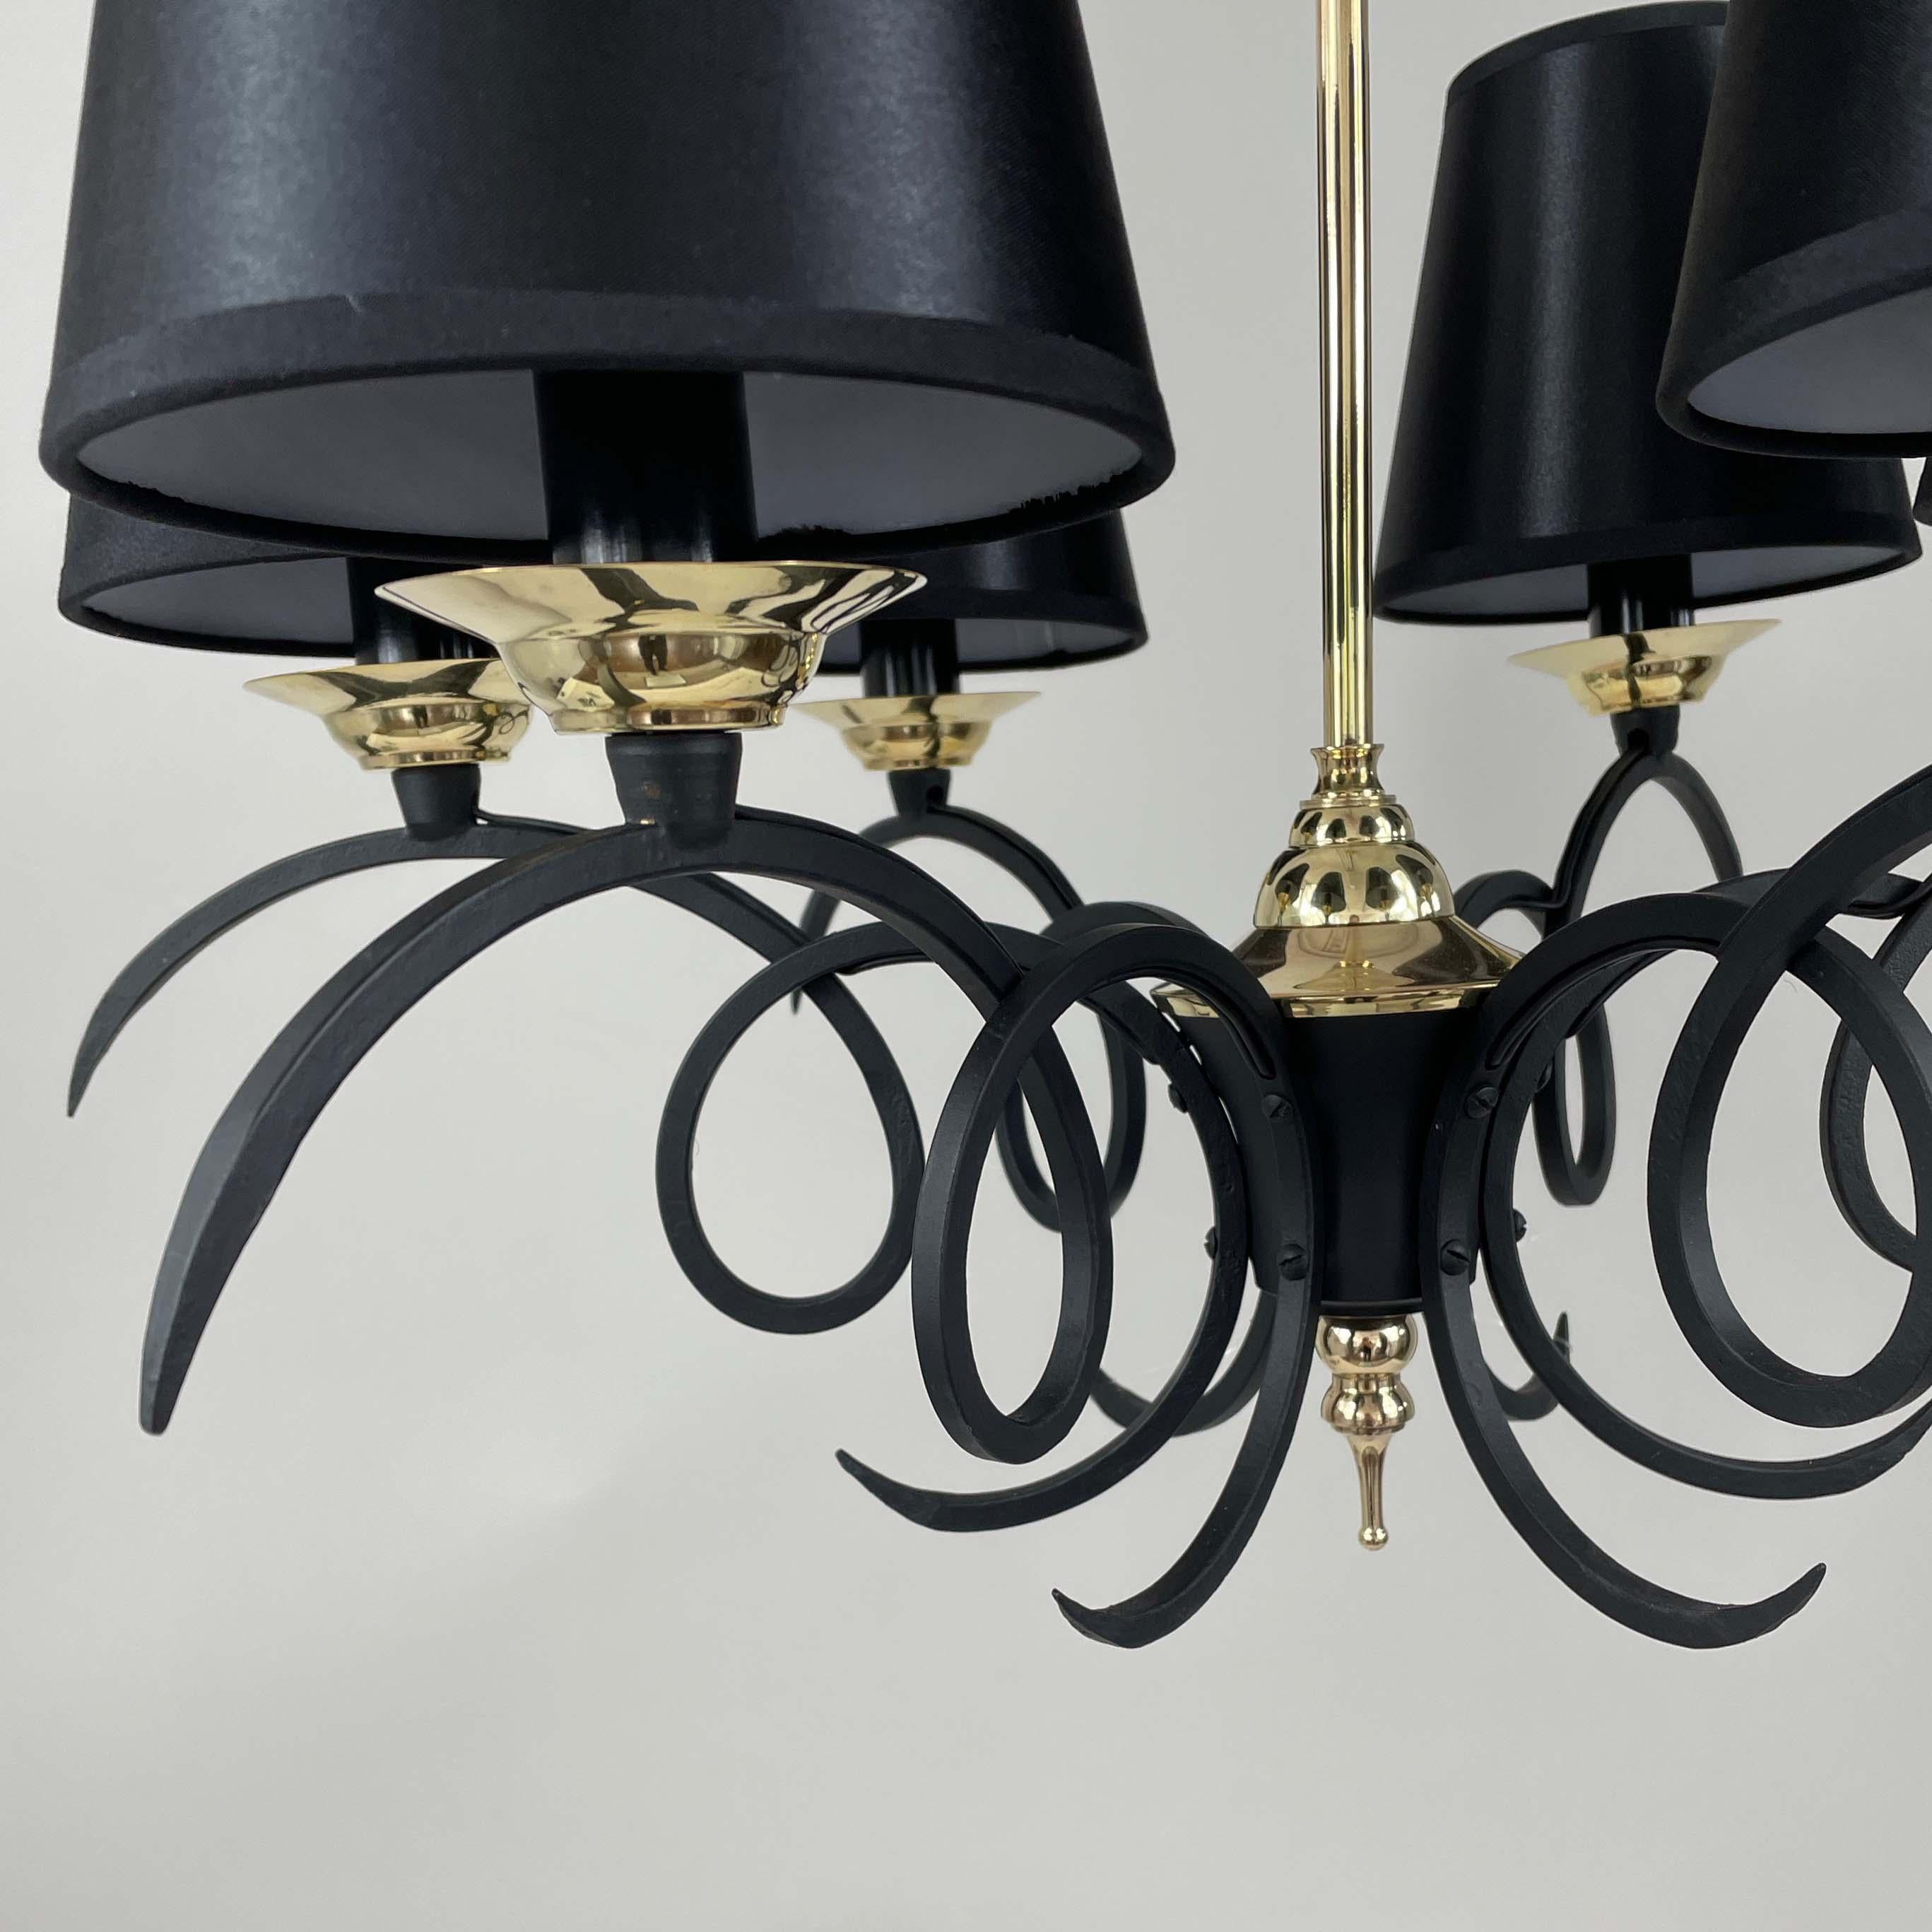 Mid-20th Century Black Cast Iron and Brass Chandelier, France 1950s For Sale